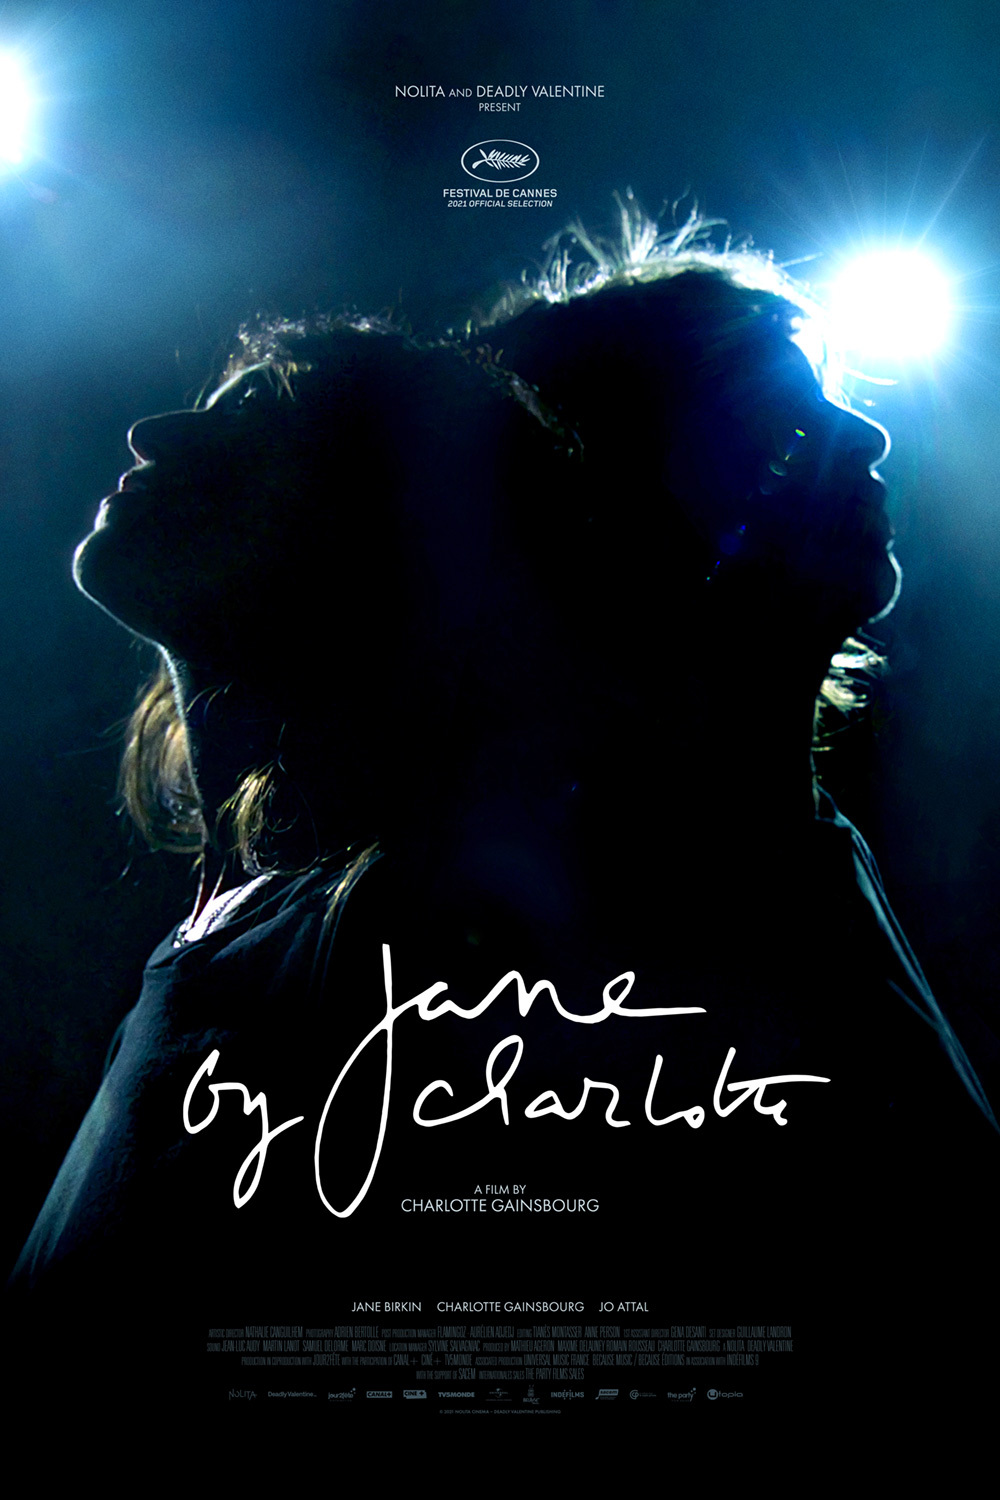 Movie poster for Jane by Charlotte, silhouettes of two women standing back to back